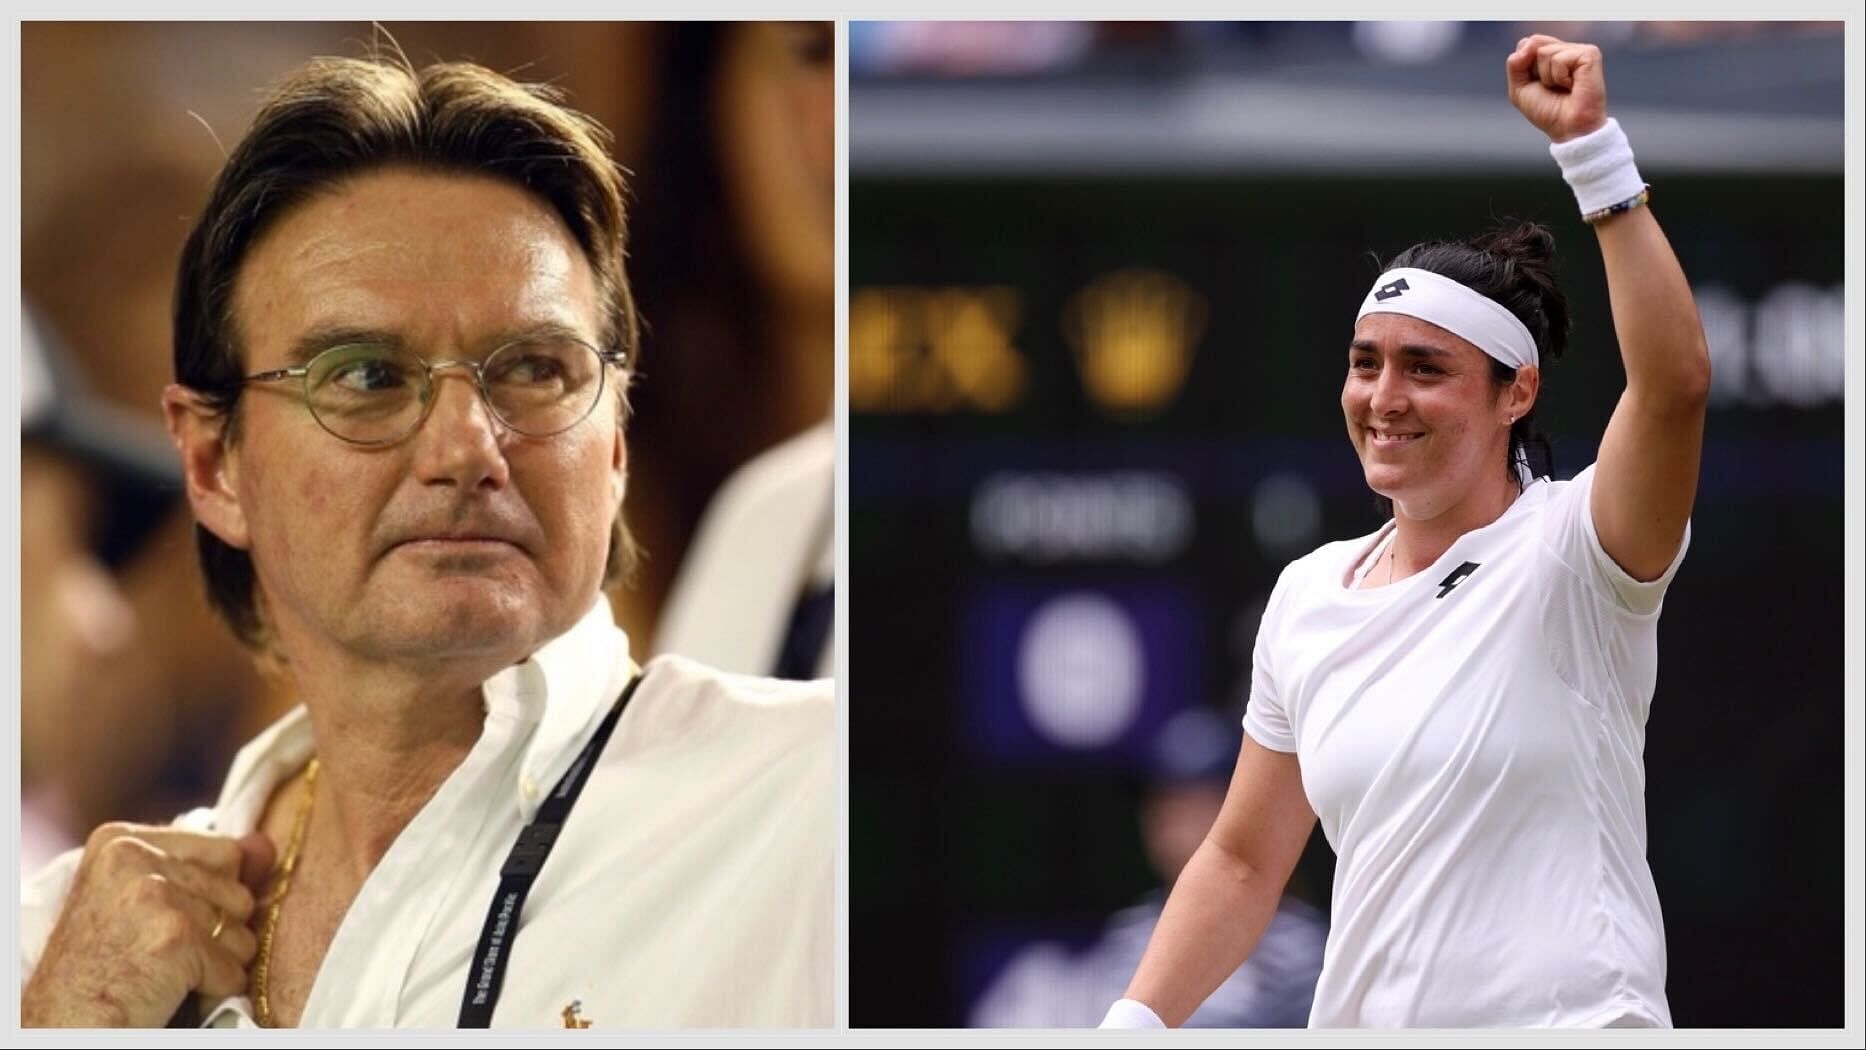 Jimmy Connors (L) and Ons Jabeur (R)